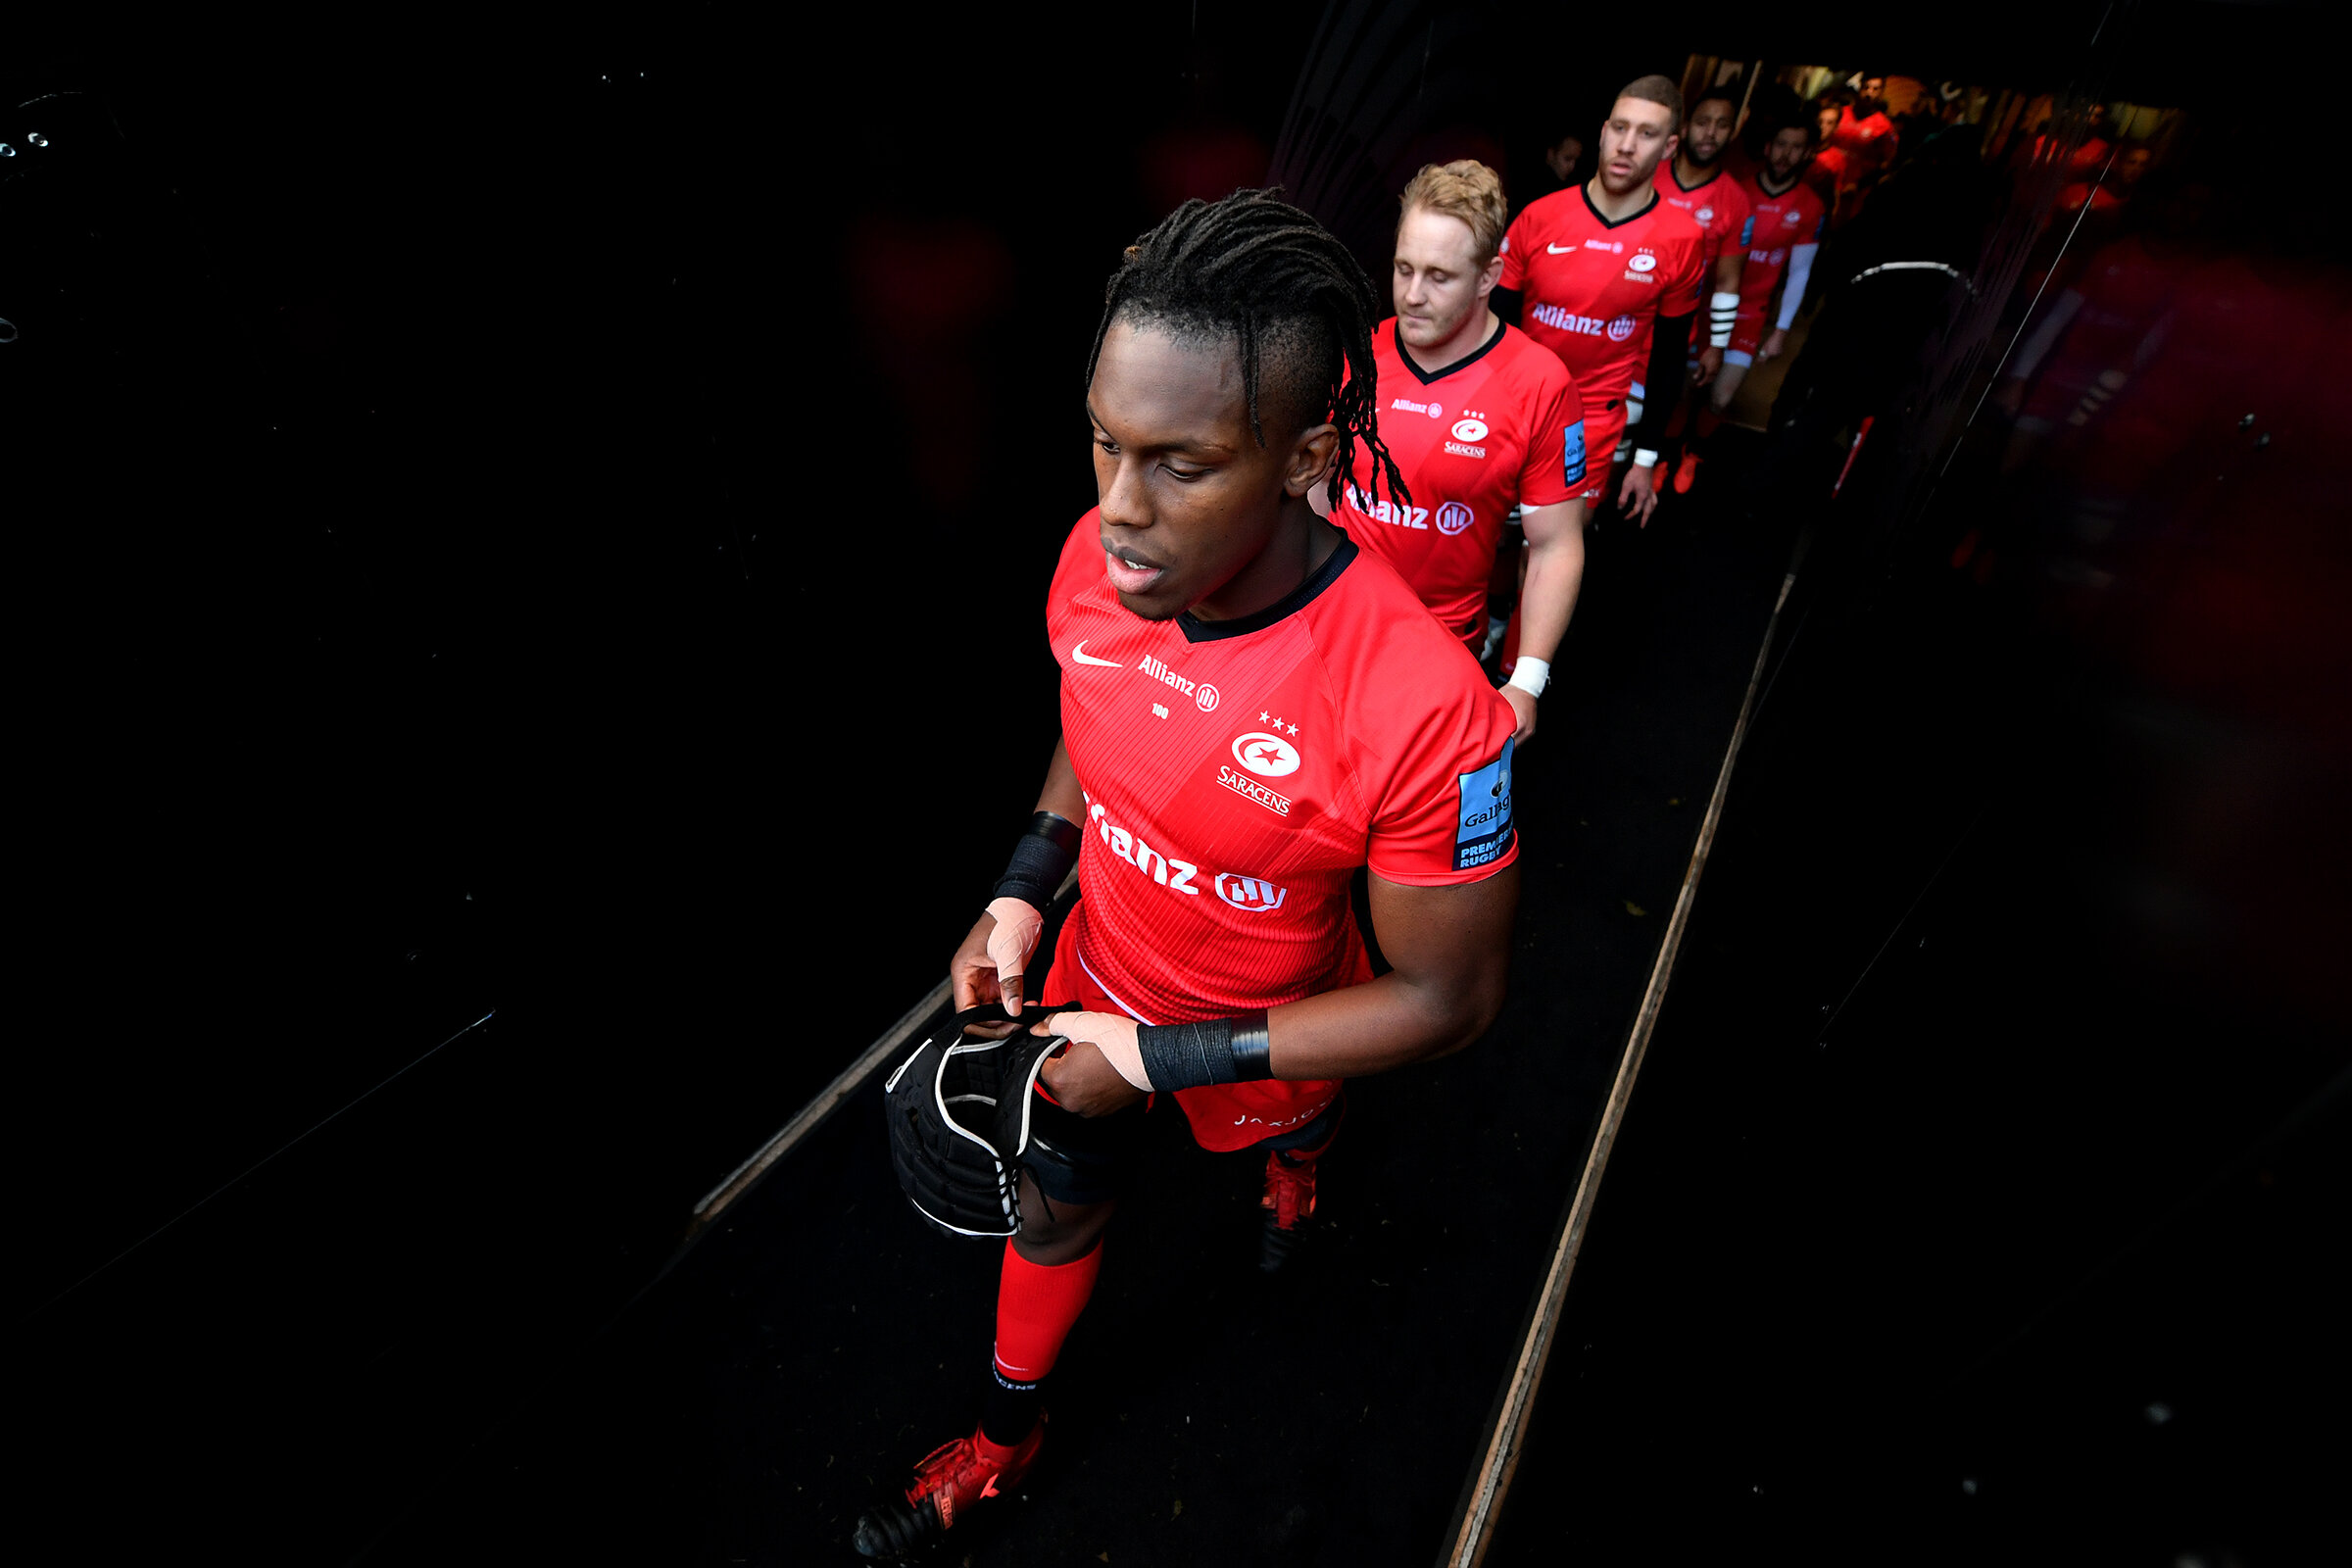  Maro Itoje and his Saracens team mates make their way out of the tunnel. 